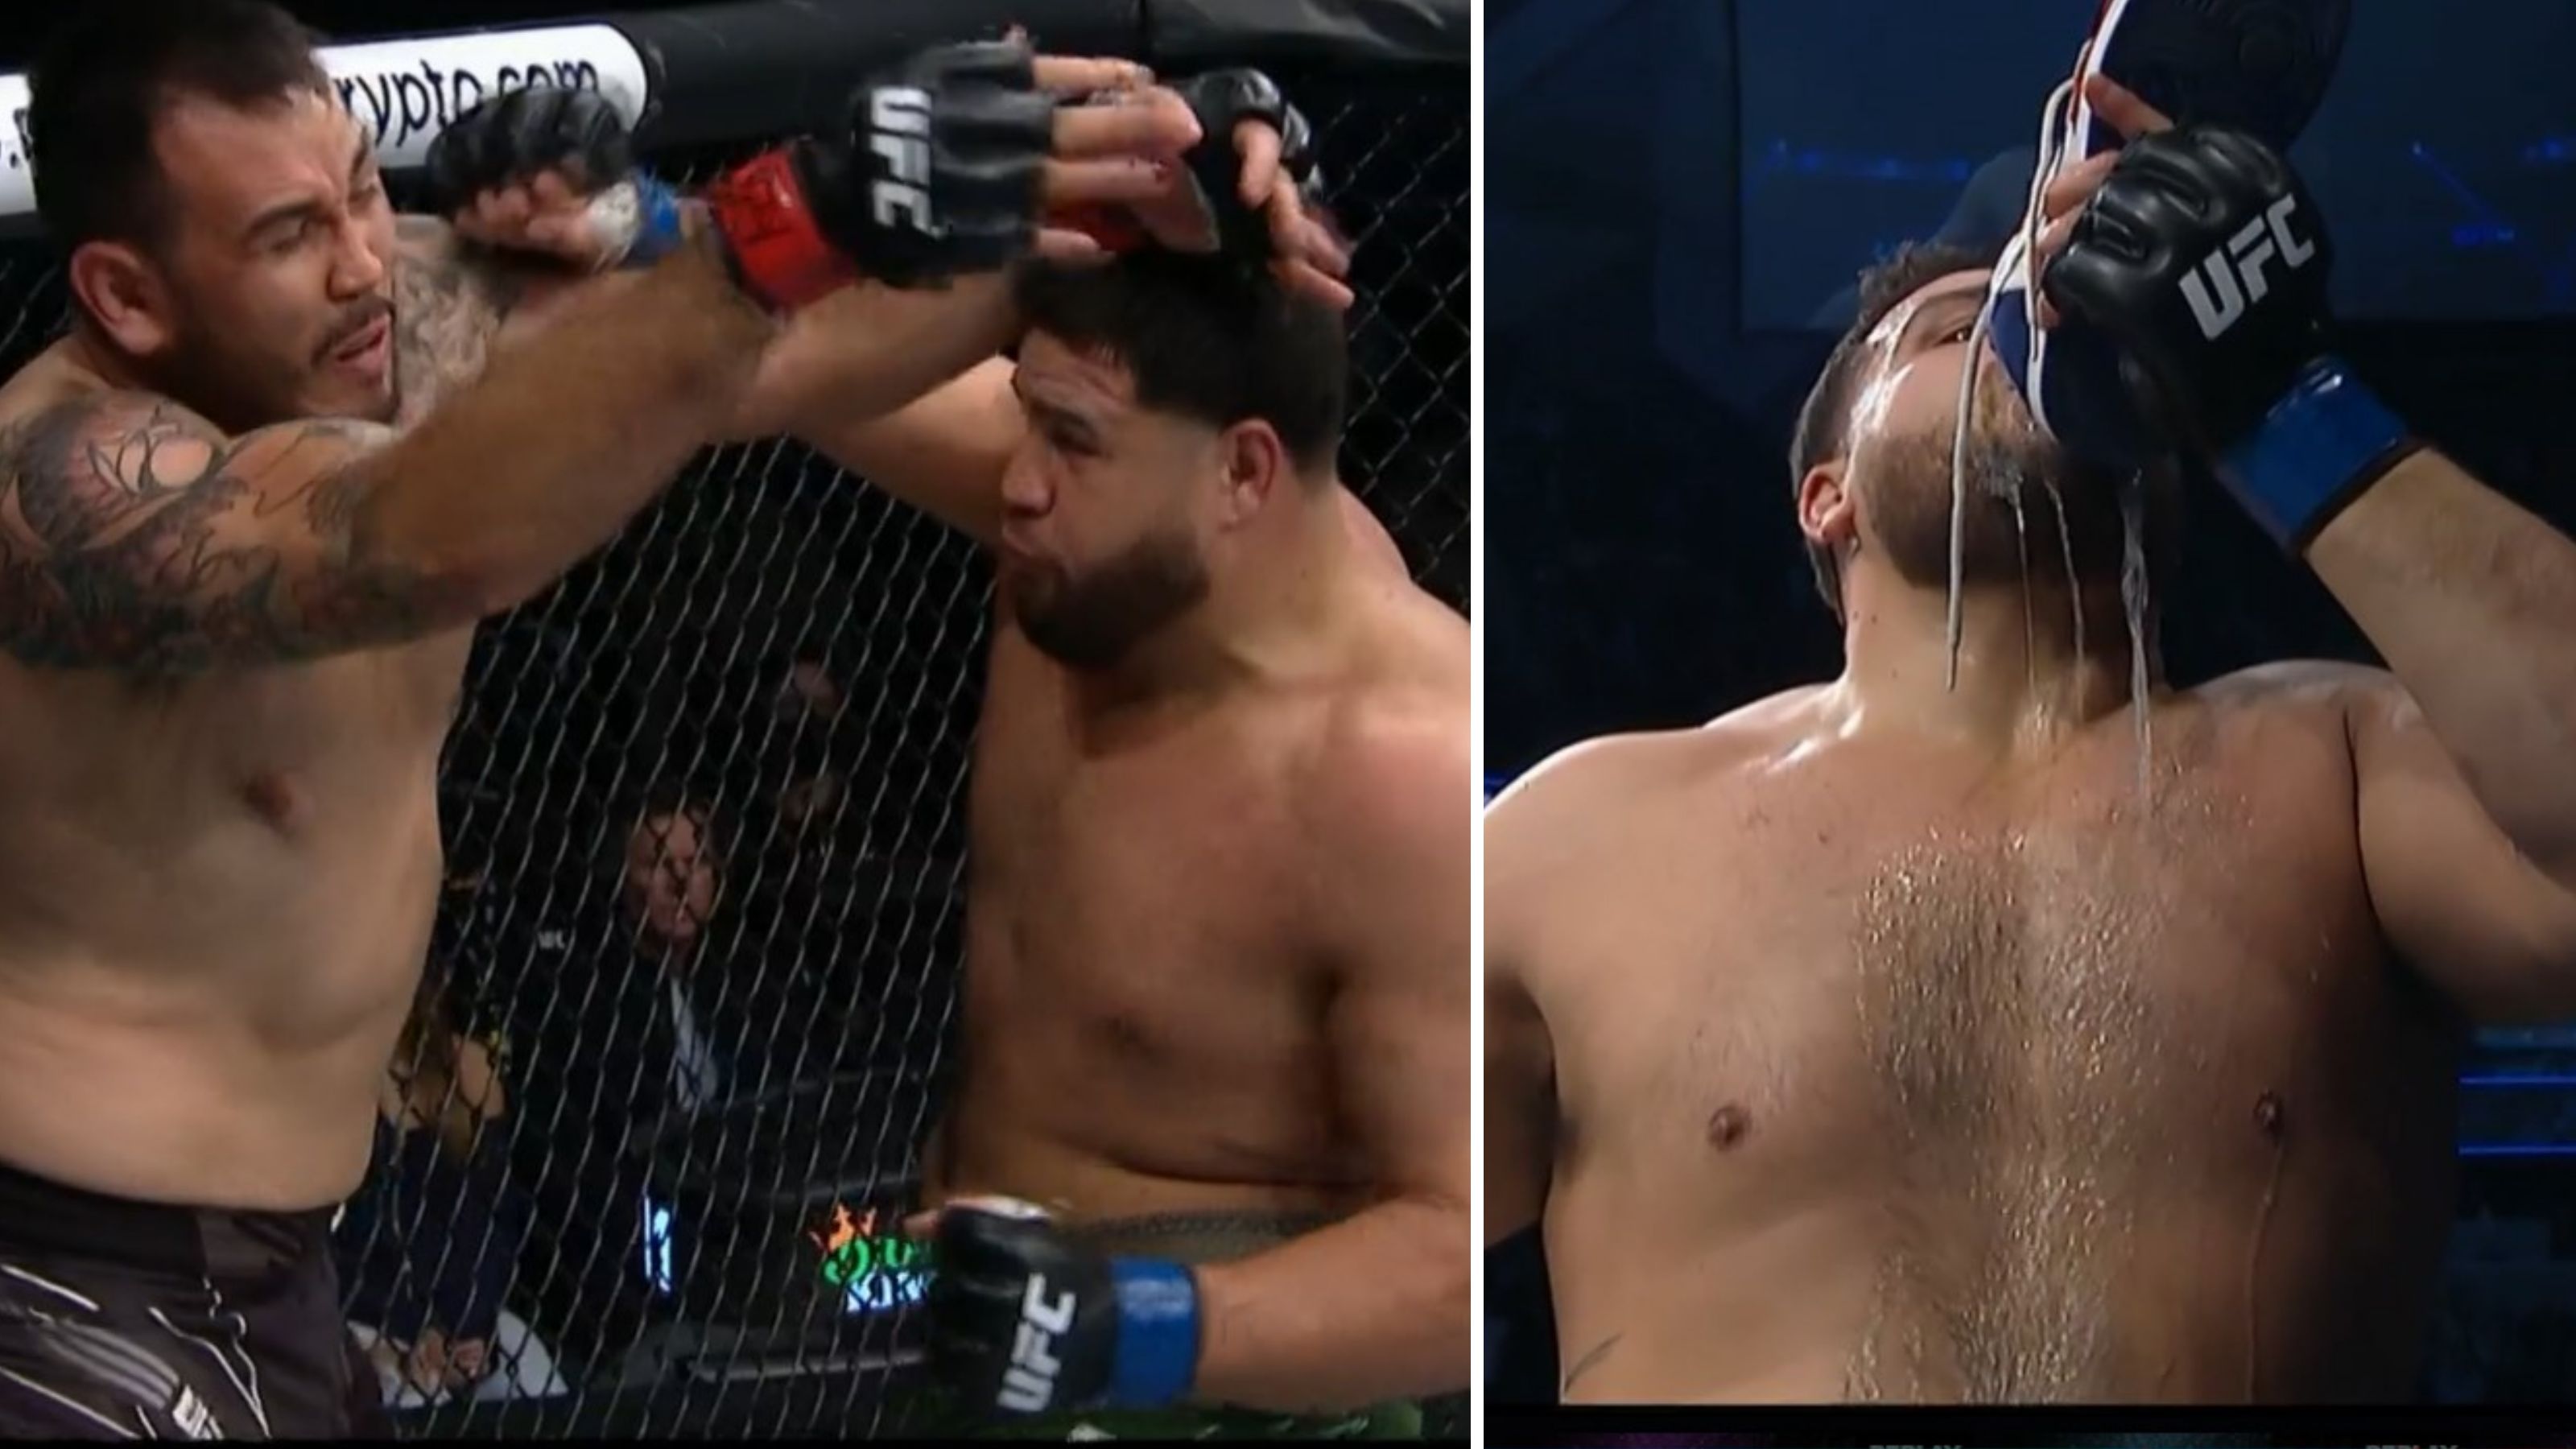 Aussie beast Tai Tuivasa celebrates another brutal UFC knockout win by downing a shoey in Las Vegas